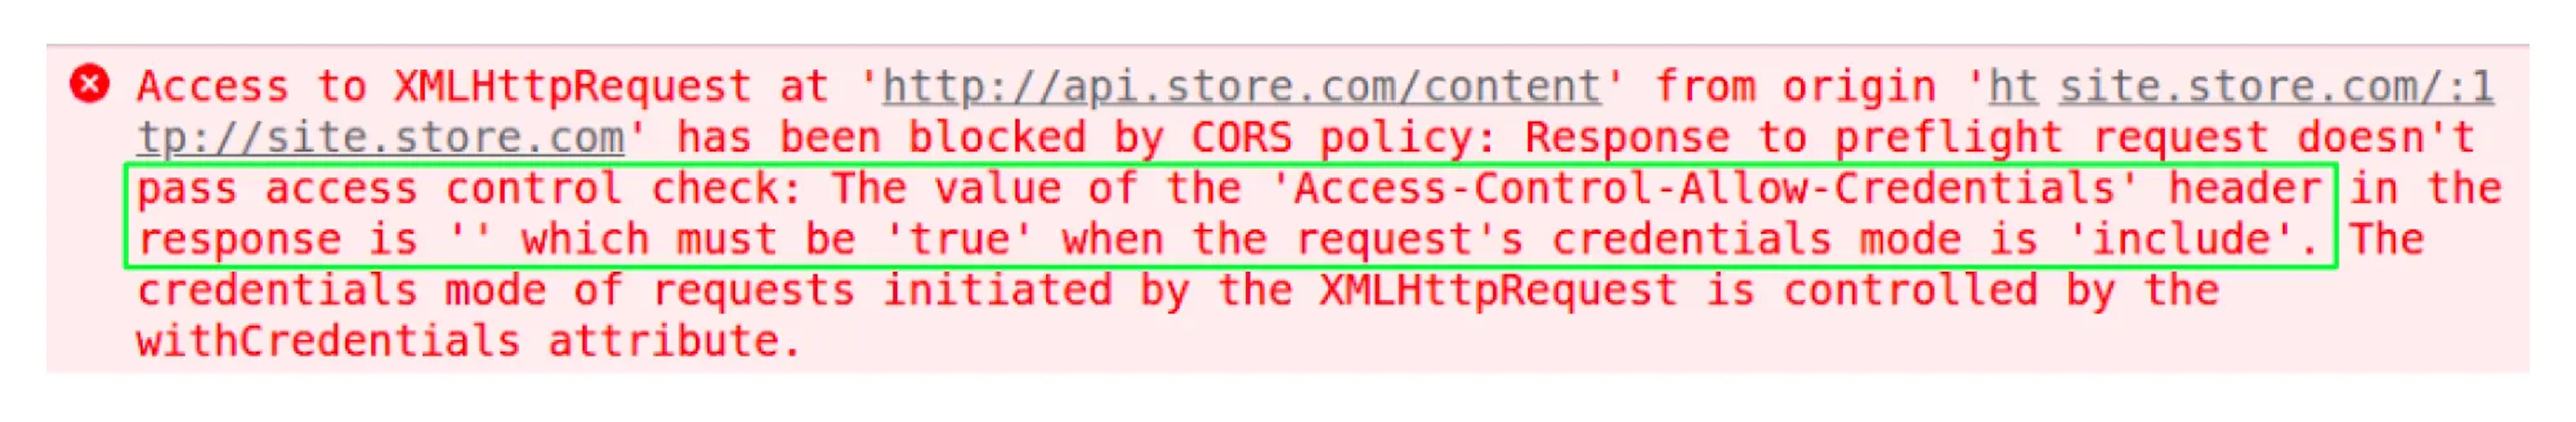 If there is no Access-Control-Allow-Credentials header, then you can get an error: